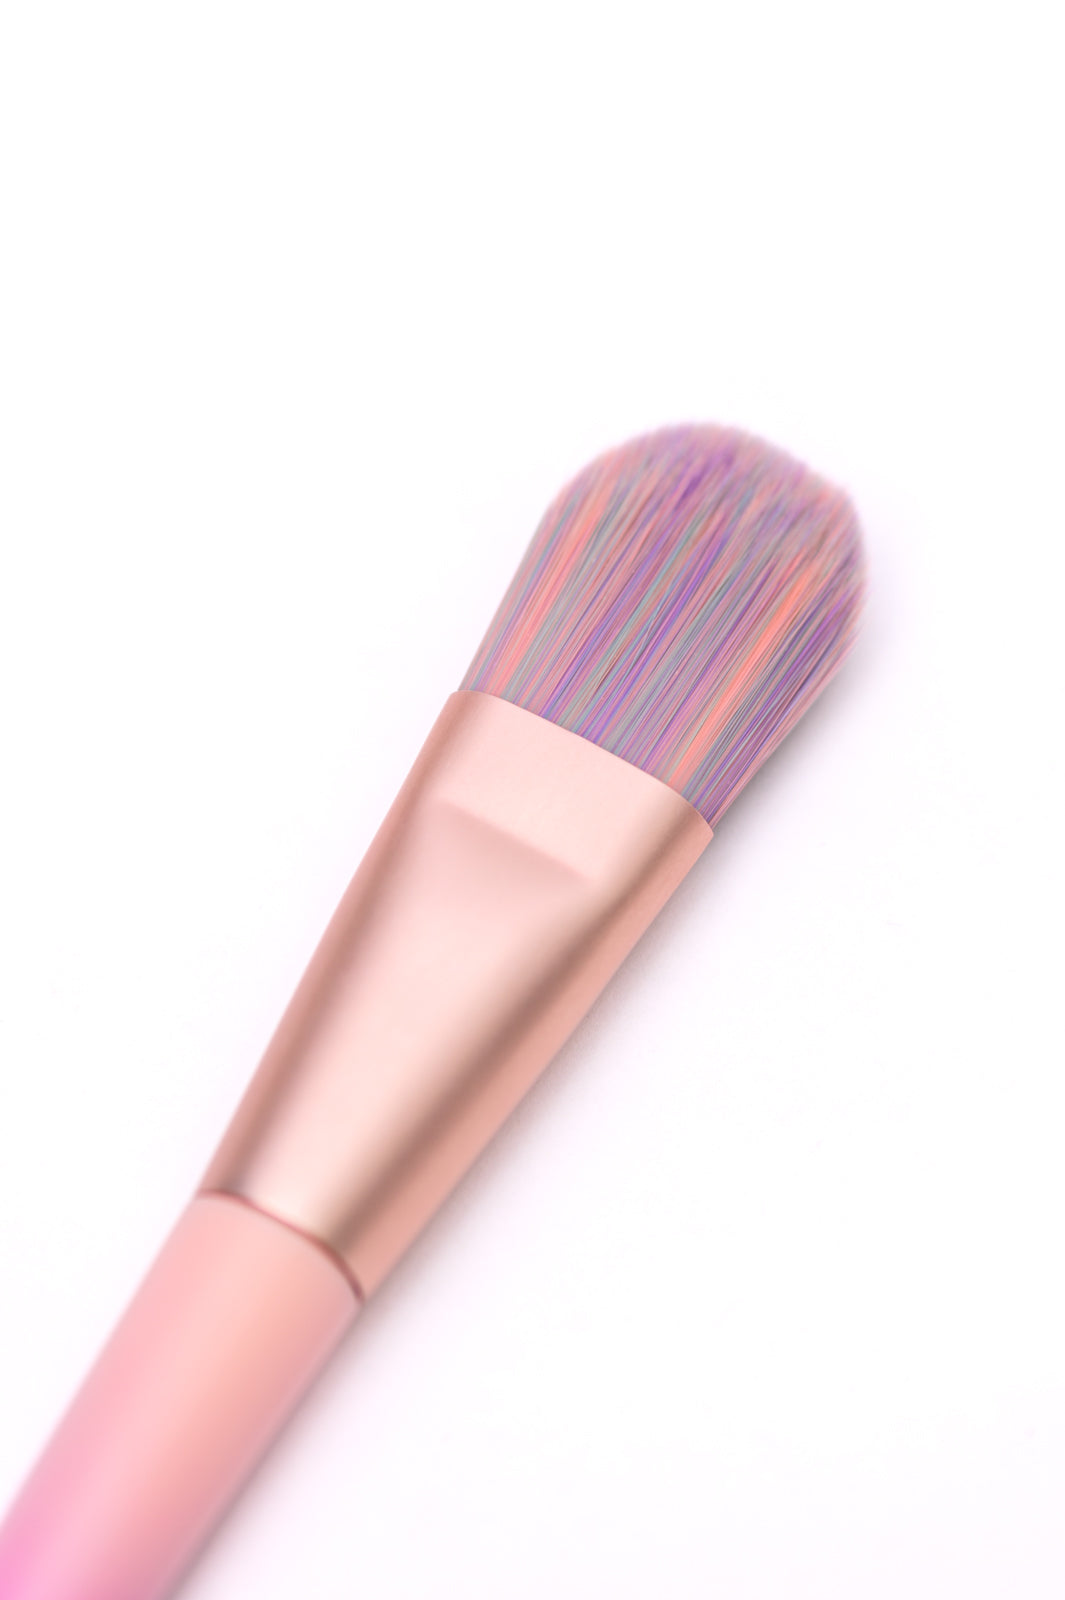 Loud and Clear Bronzer Brush (Ships in 1-2 Weeks)